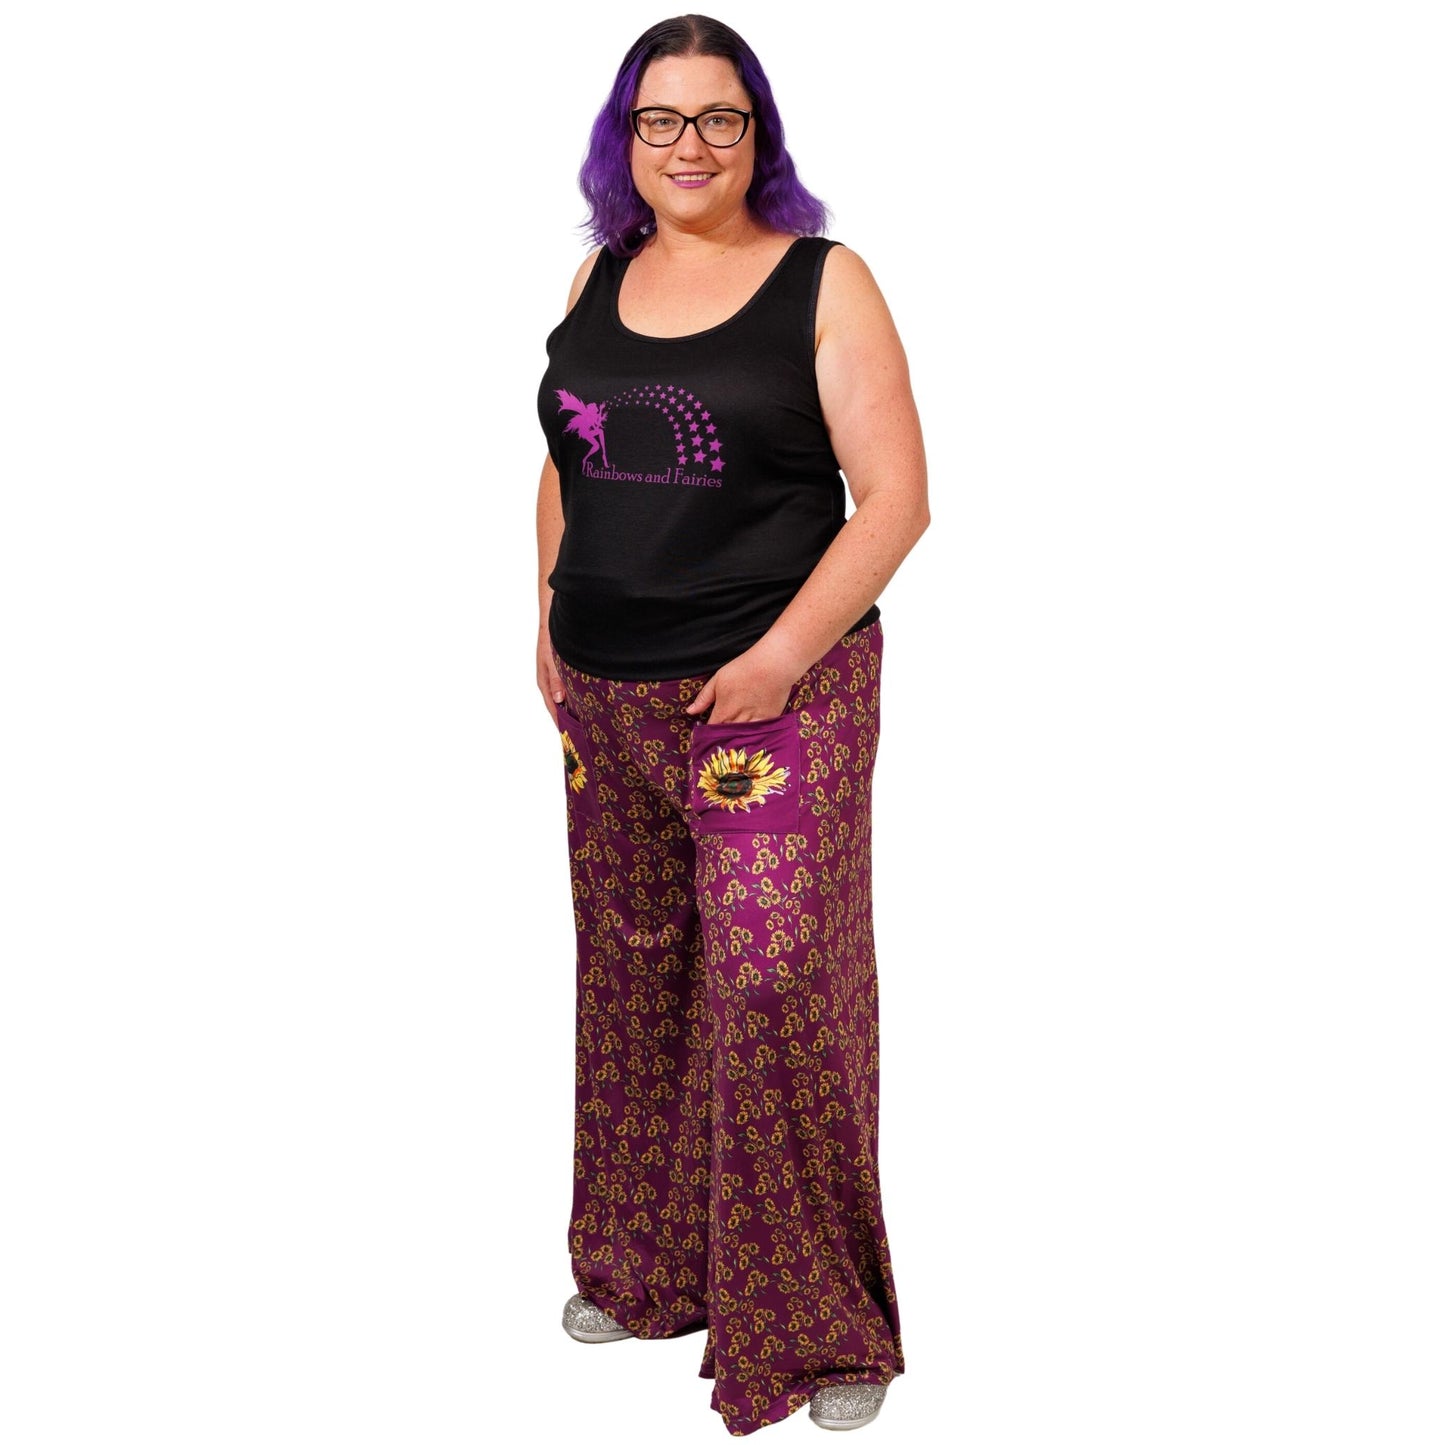 Sunflower Wide Leg Pants by RainbowsAndFairies.com.au (Sunflowers - Flowers - Floral Print - Vintage Inspired - Flares - Pants With Pockets) - SKU: CL_WIDEL_SUNFL_ORG - Pic-04